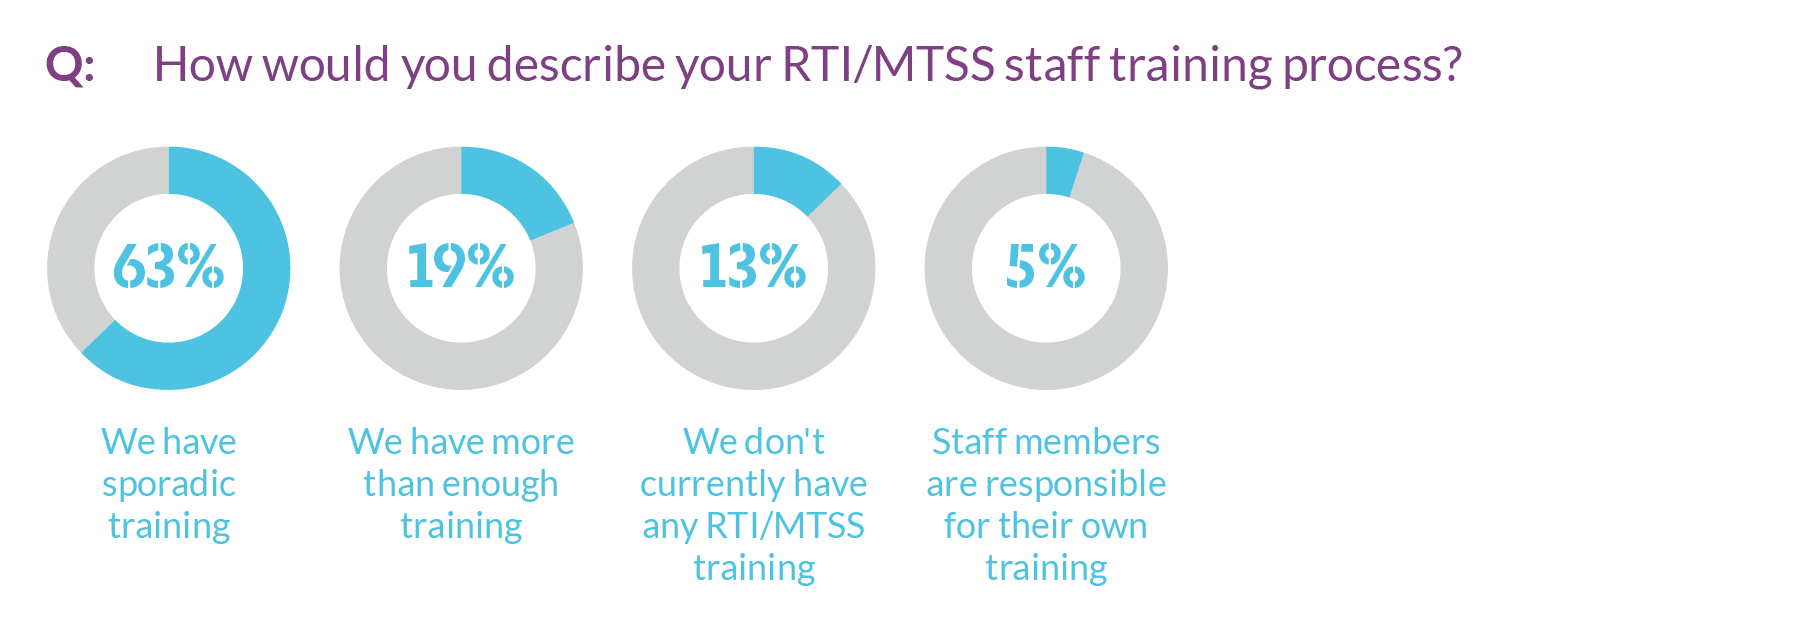 Graph showing the breakdown of RTI/MTSS staff training process